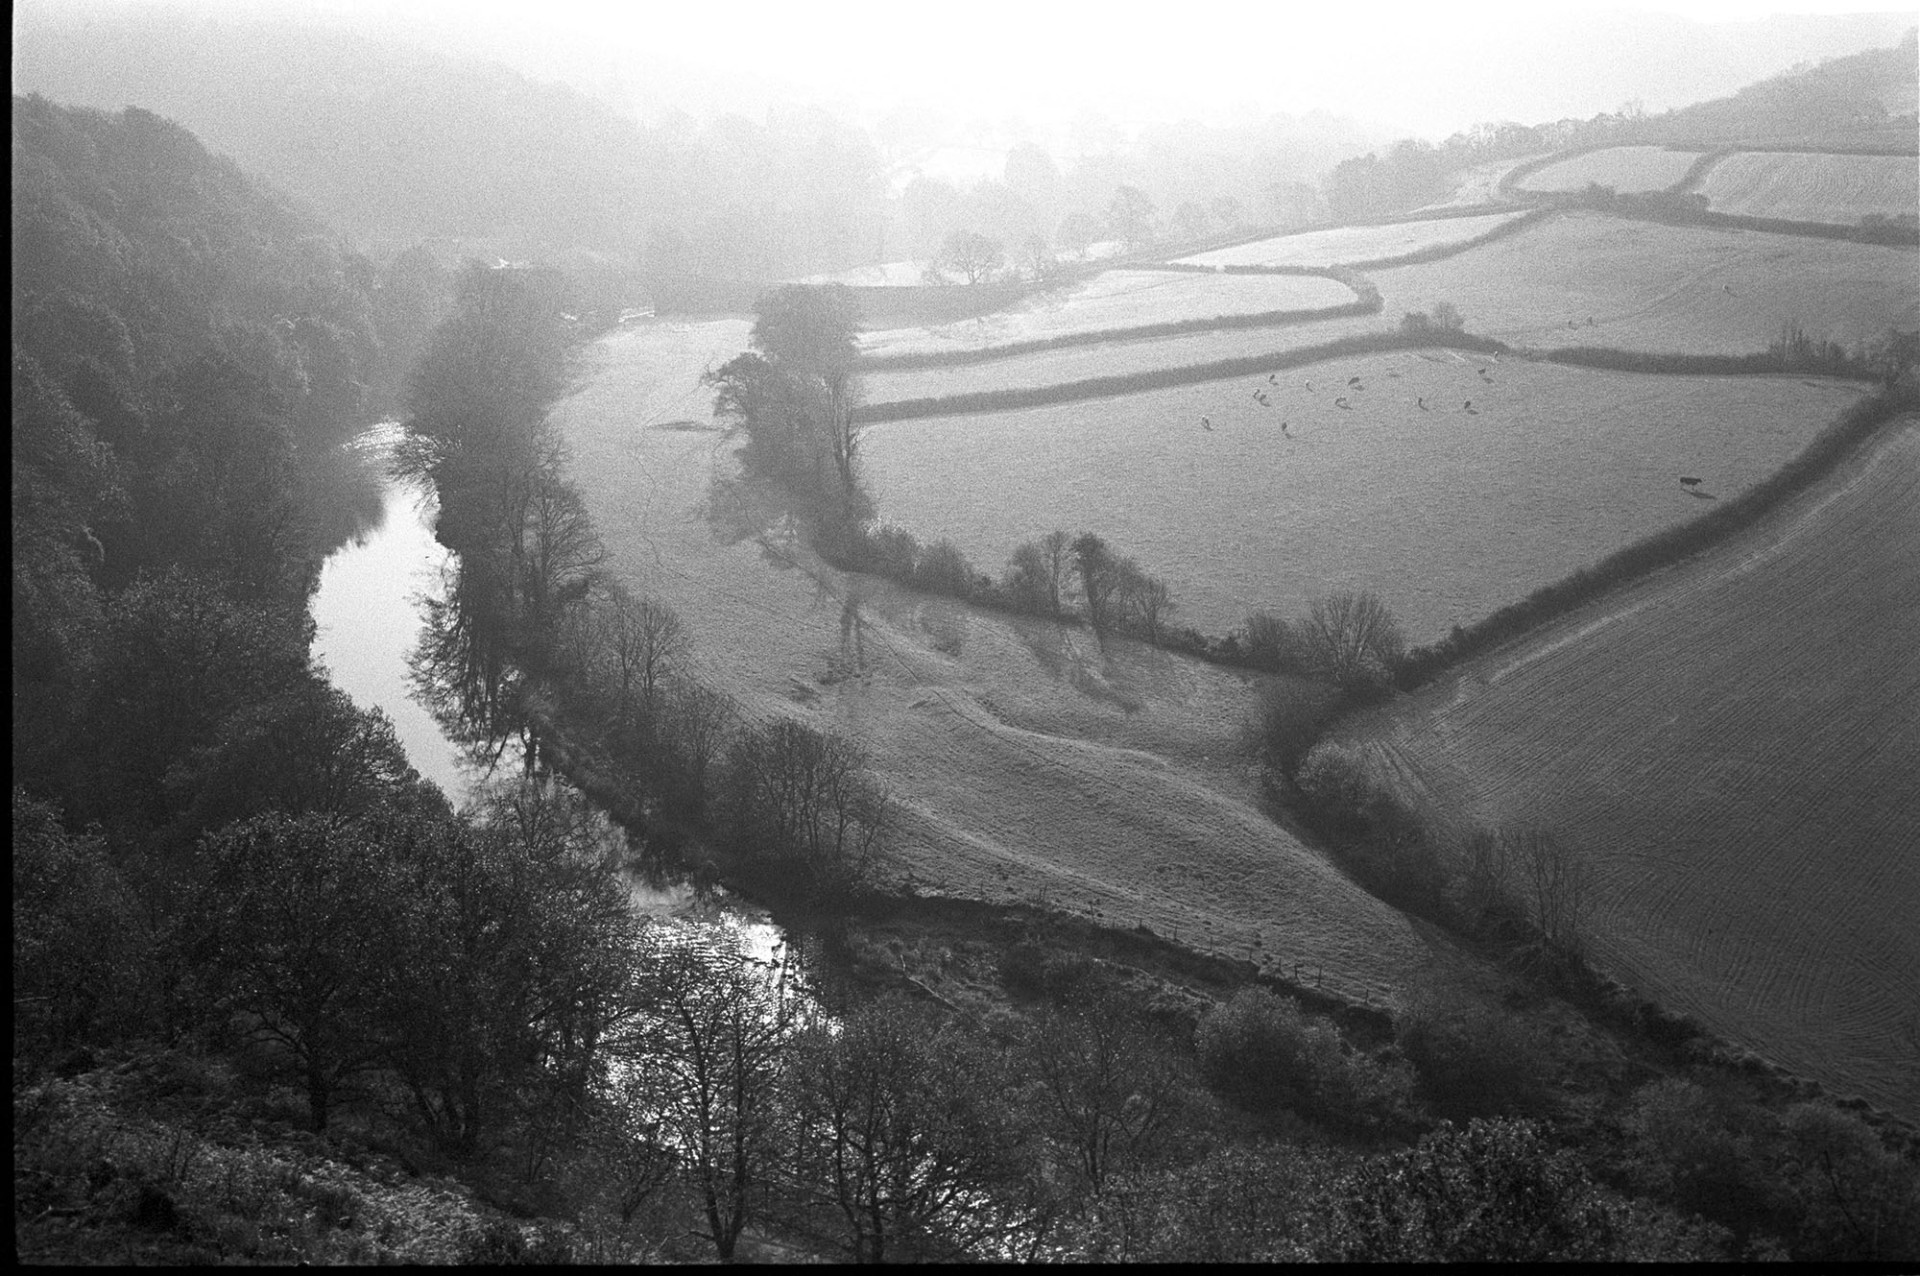 View over river and fields early morning.
[An early morning view over the River Torridge, fields and woodland at Torrington.]